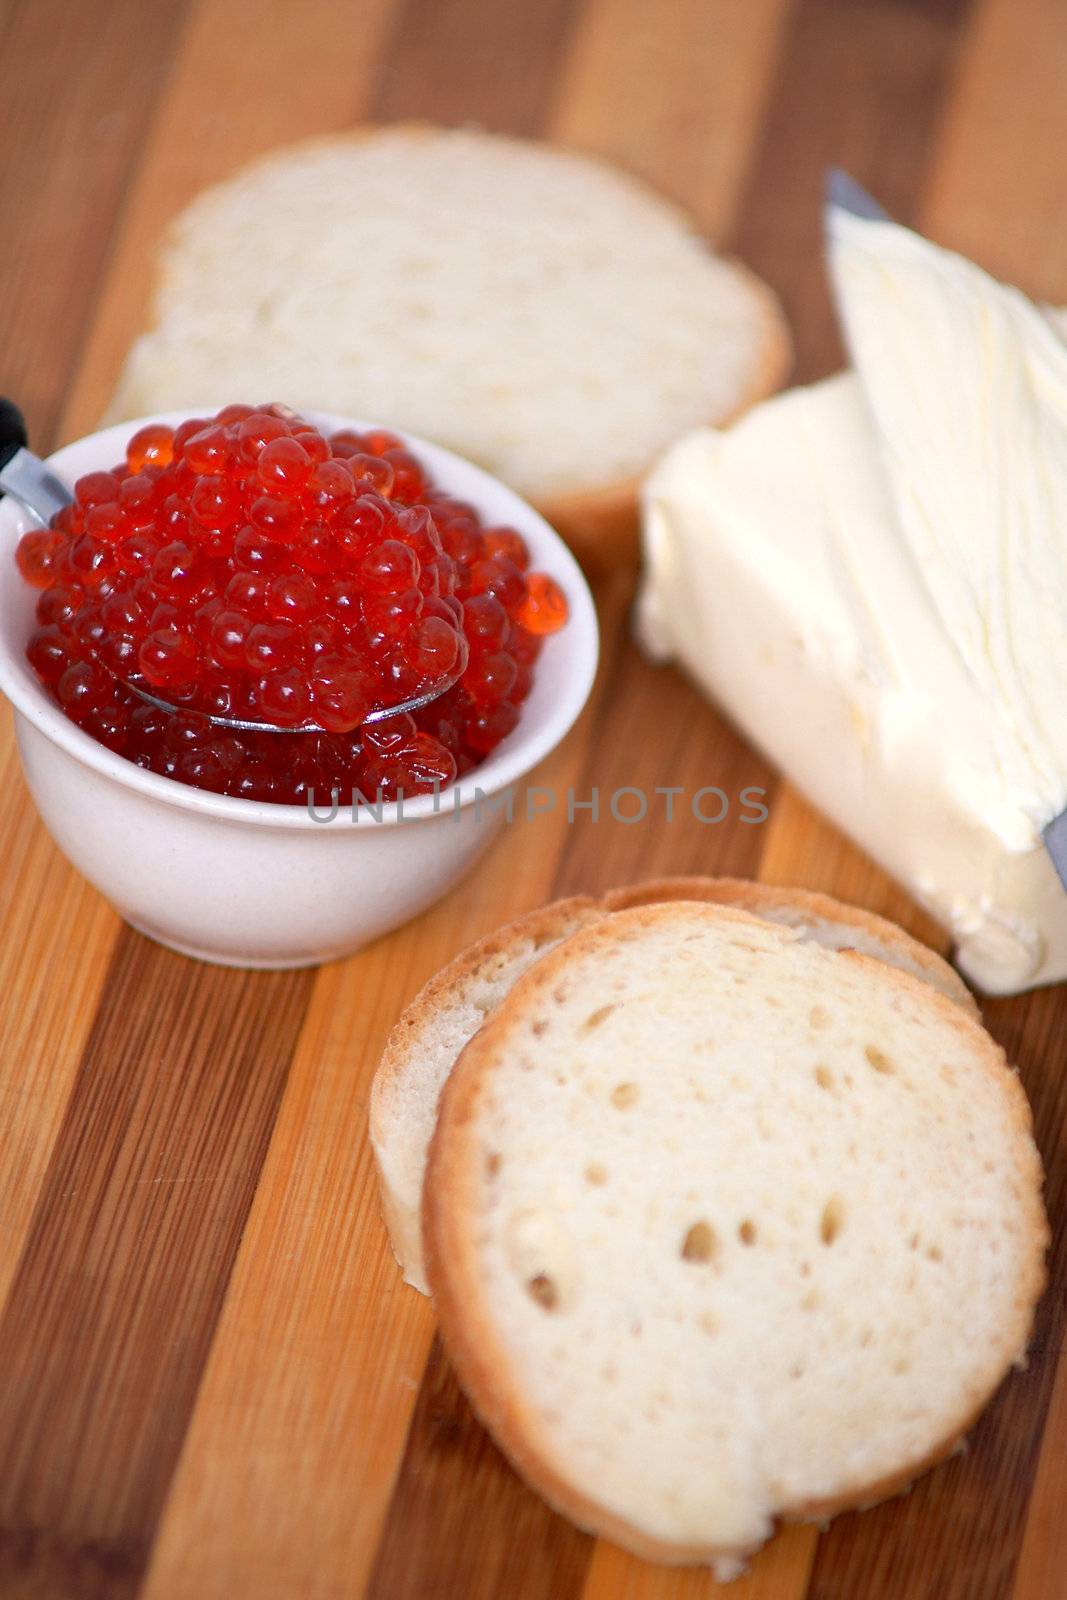 An image of bread with caviar